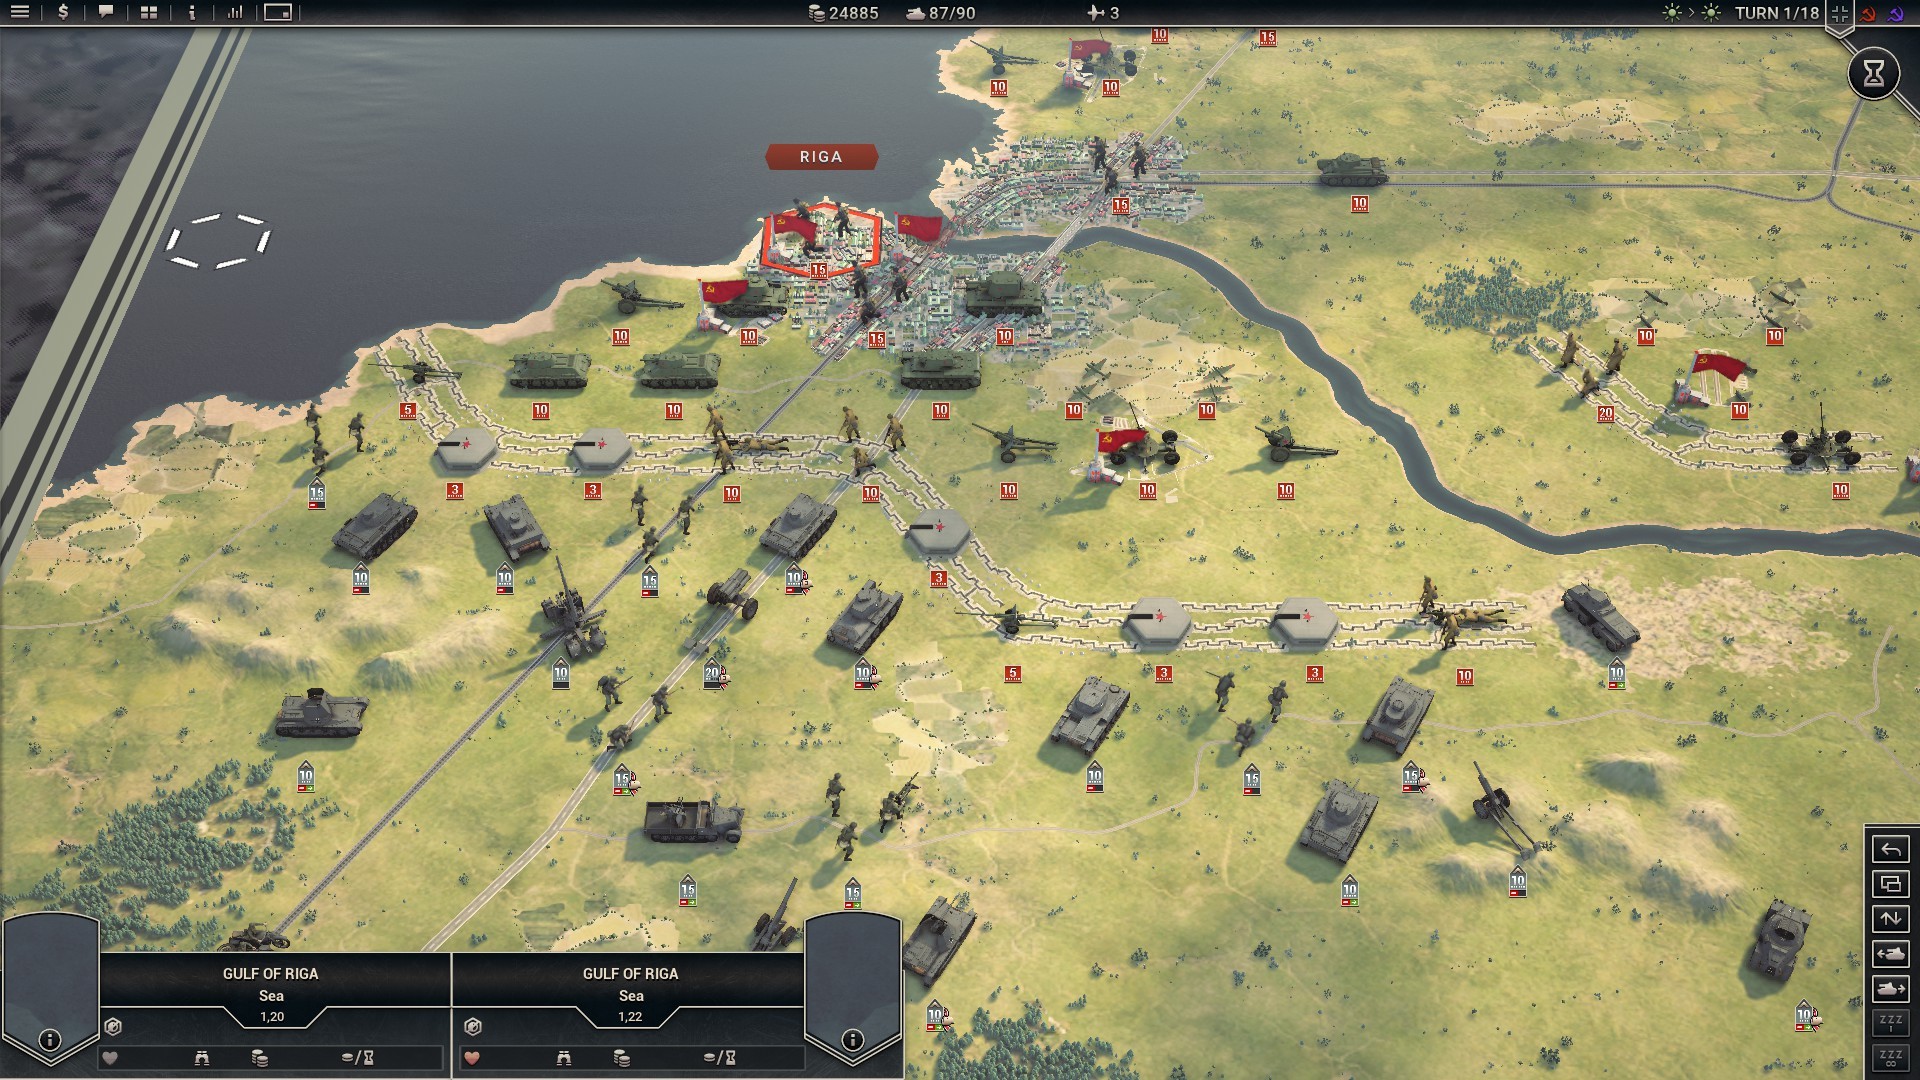 Panzer Corps 2 - Axis Operations 1941 DLC Steam CD Key 4.4 $